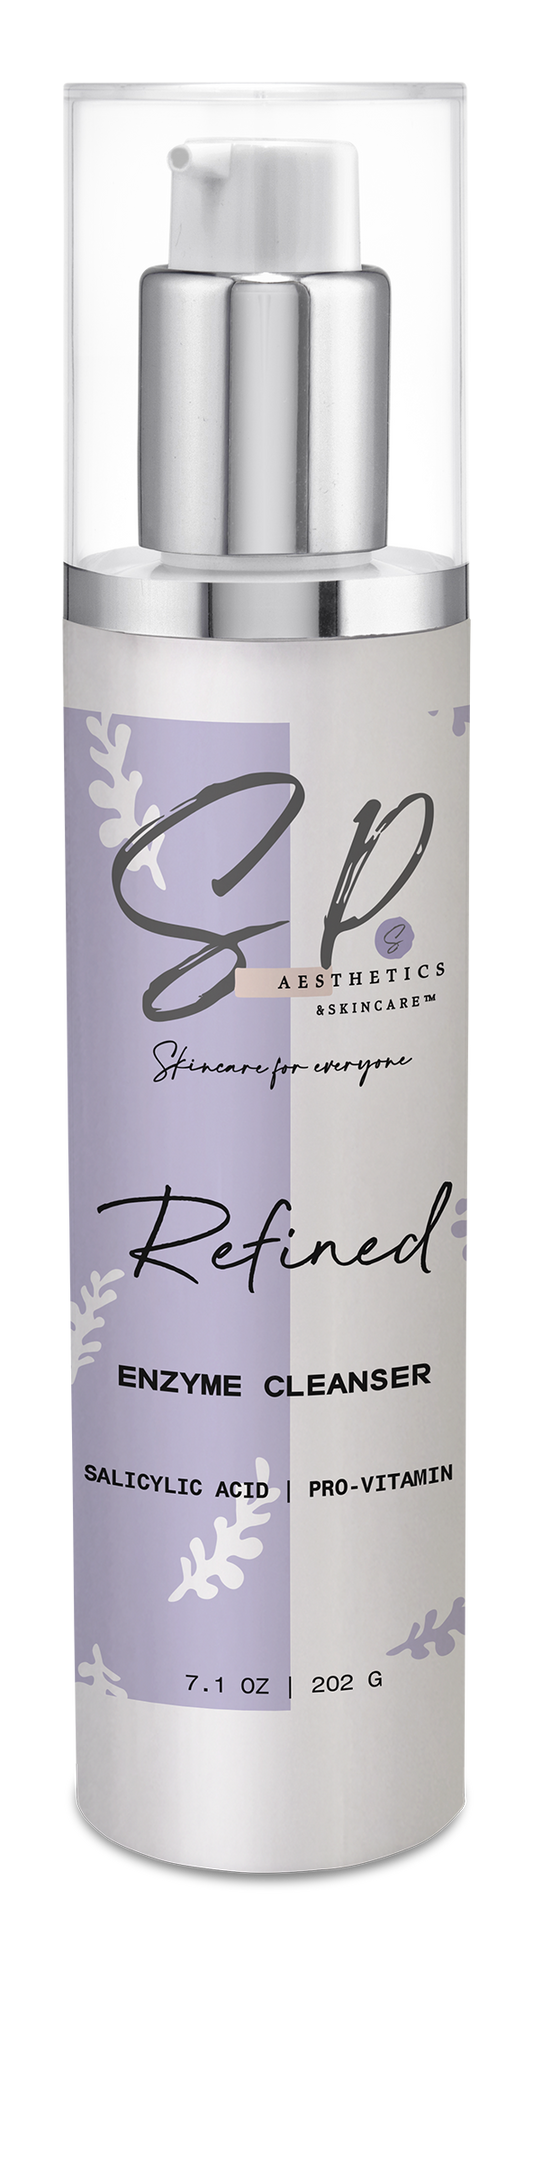 Refined Enzyme Cleanser